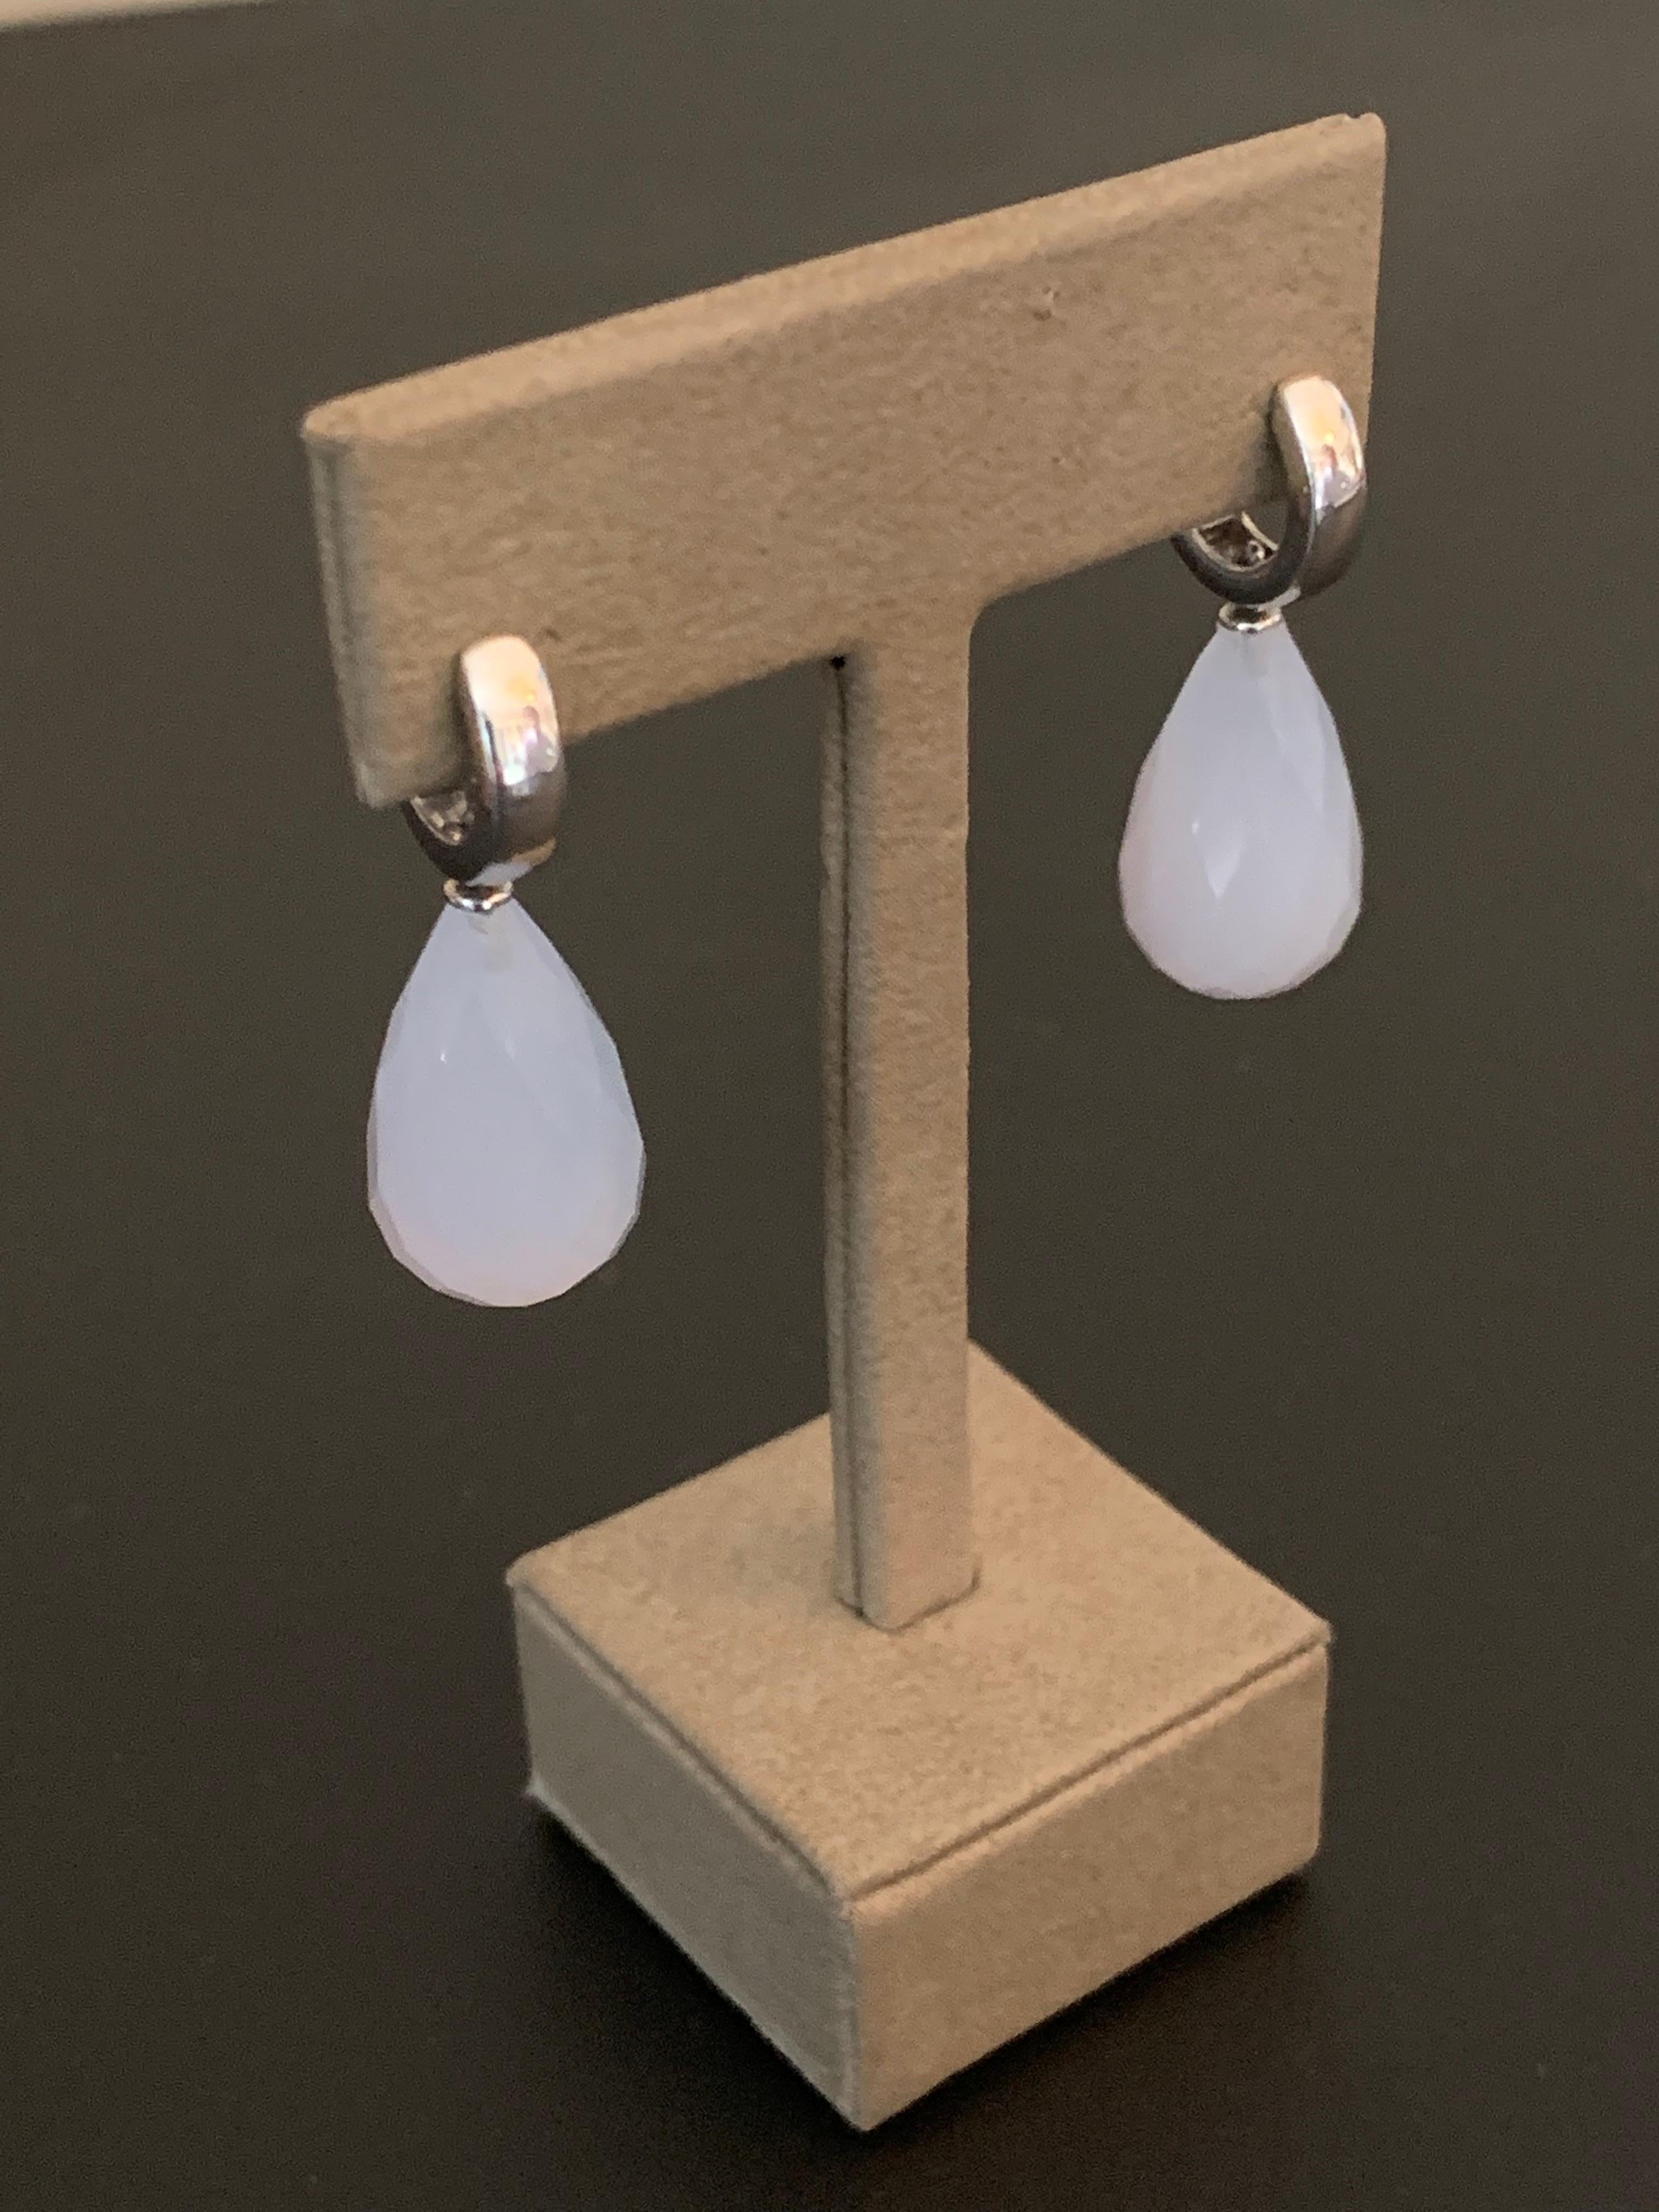 18 K white Gold Chalcedony pampel drop earrings. Each pampel drop measures approximately 2.3 cm. Stylish italian jewellery. 
Masterfully handcrafted piece! Authenticity and money back is guaranteed.
For any enquires, please contact the seller